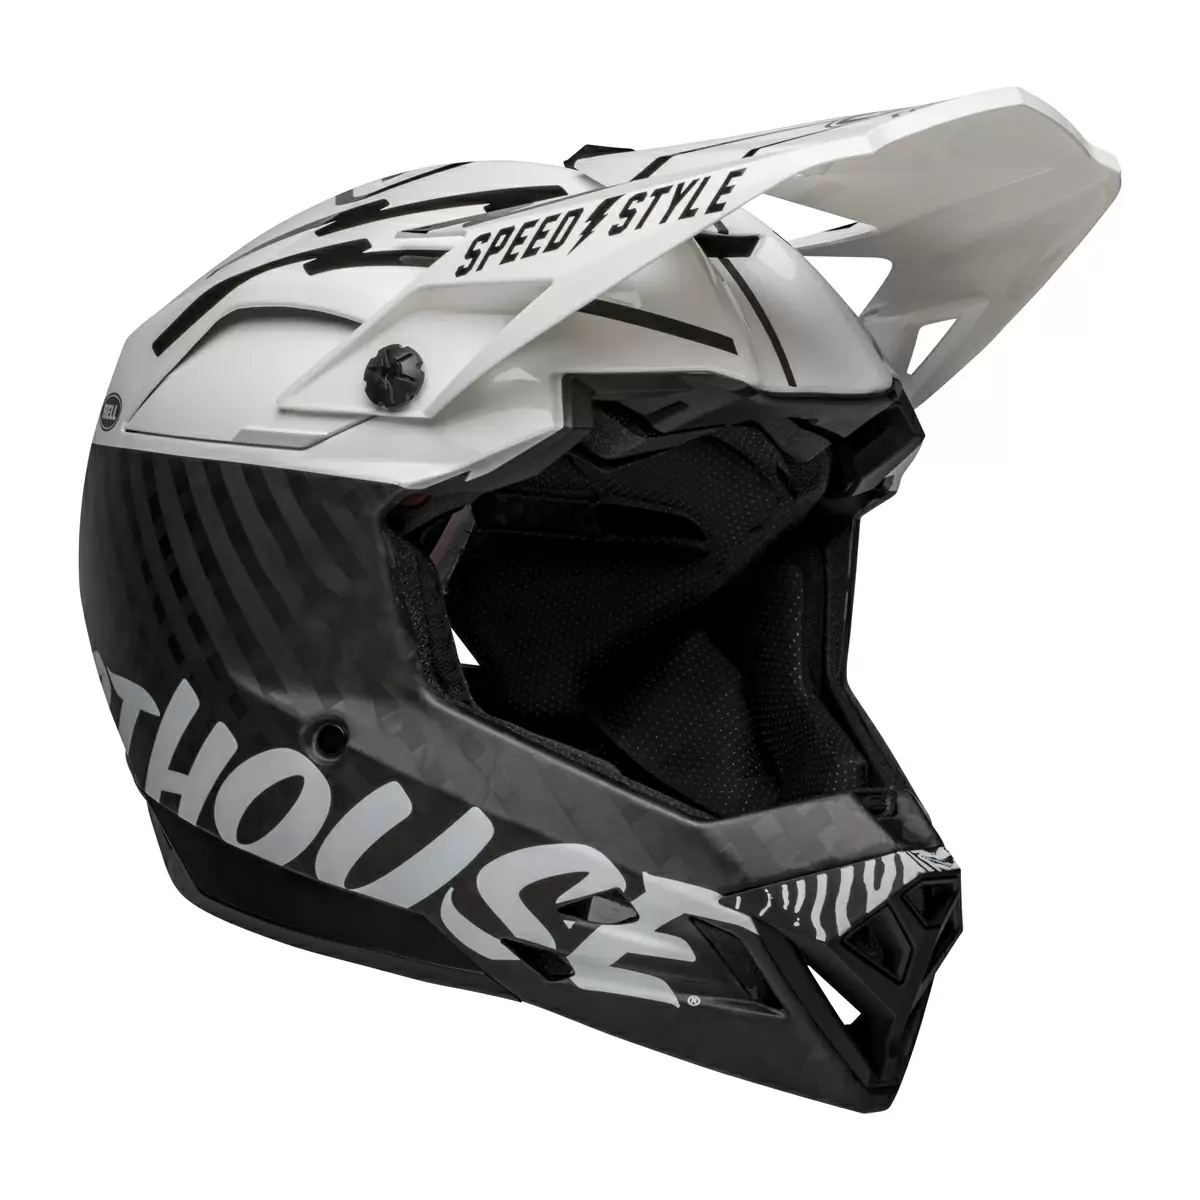 Casco Integral Full-10 Spherical Fasthouse Carbon Talla XS/S (51-55cm) - image